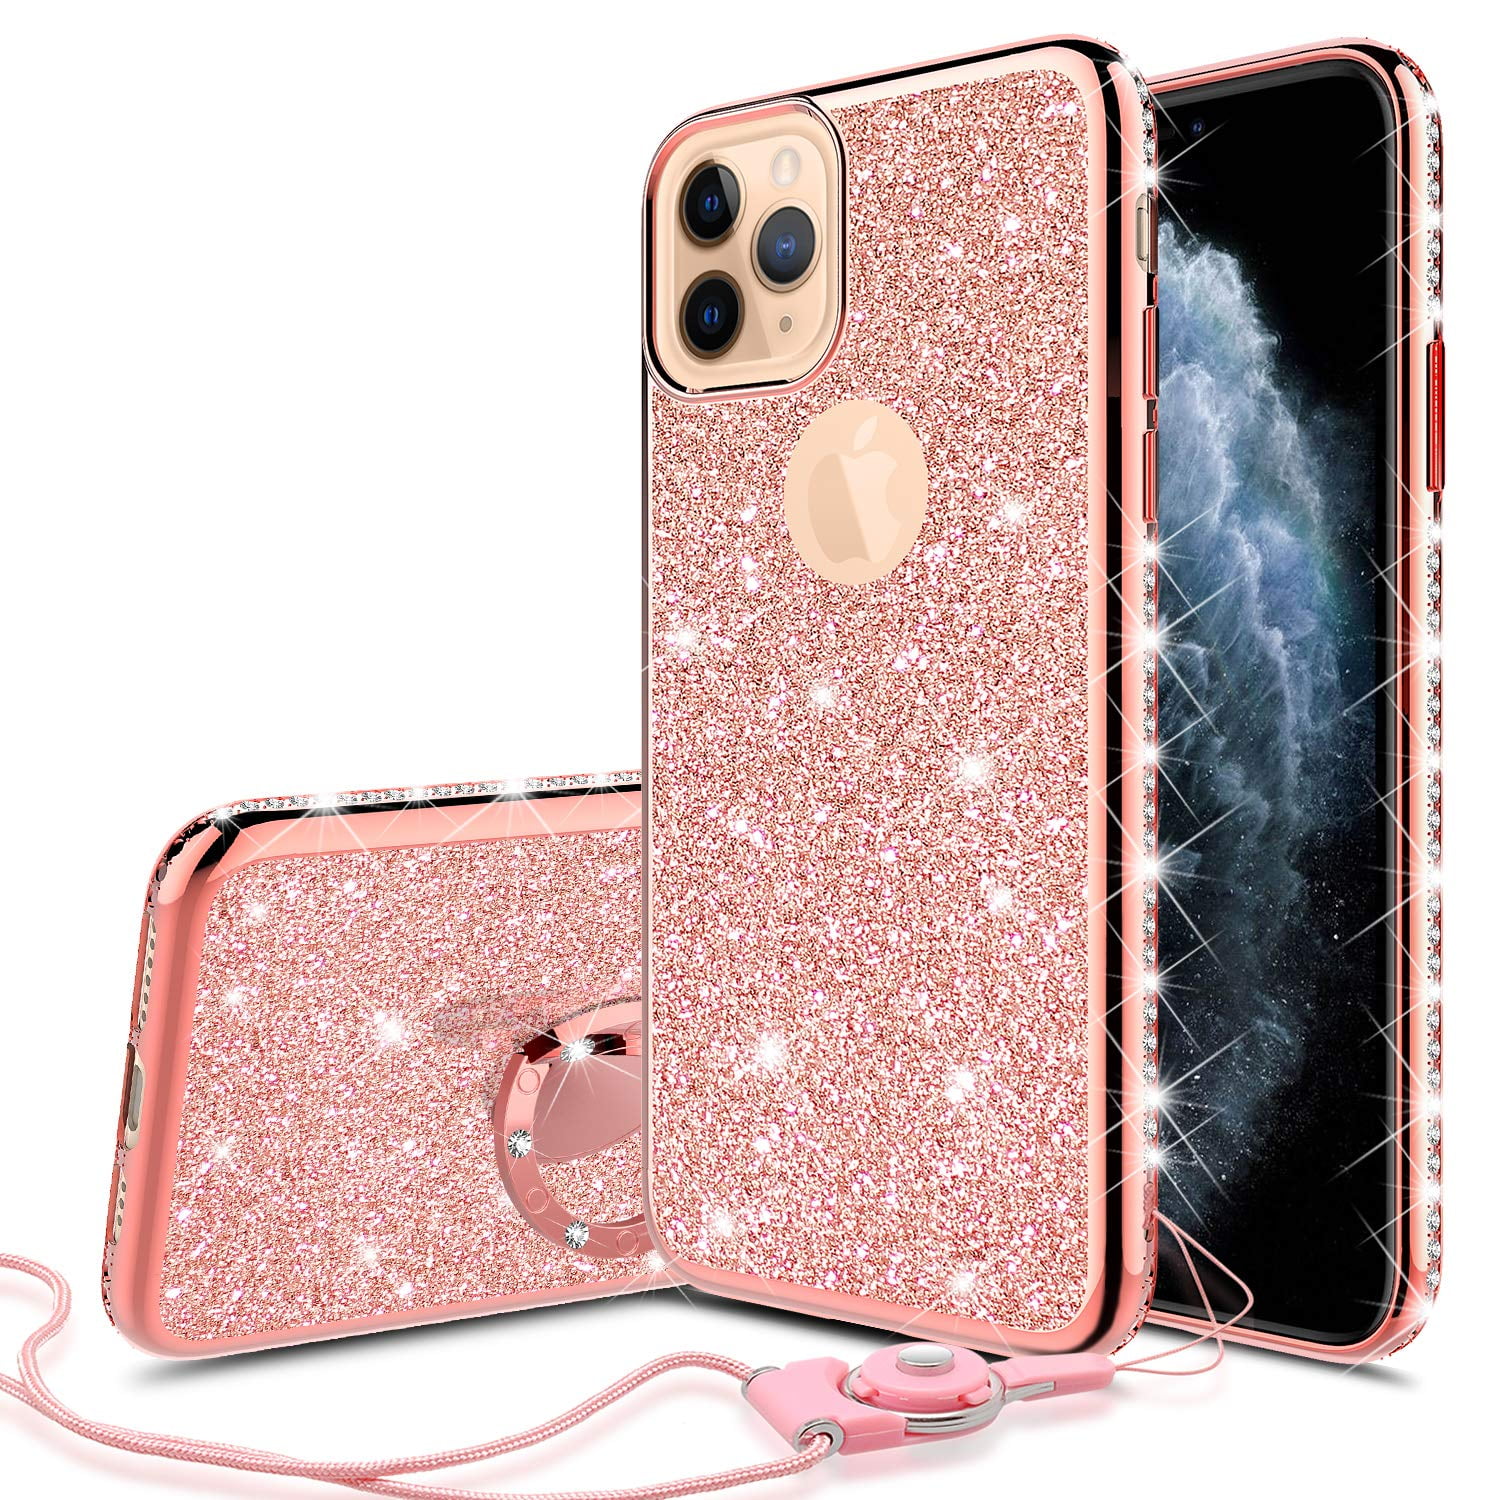 Apple Iphone 11 Pro Max Case For Girl Women Glitter Cute Girly Ring Kickstand Diamond Rhinestone Bumper Pink Clear Shock Proof Protective Phone Case Iphone 11 Pro Max 6 5inch Rose Gold